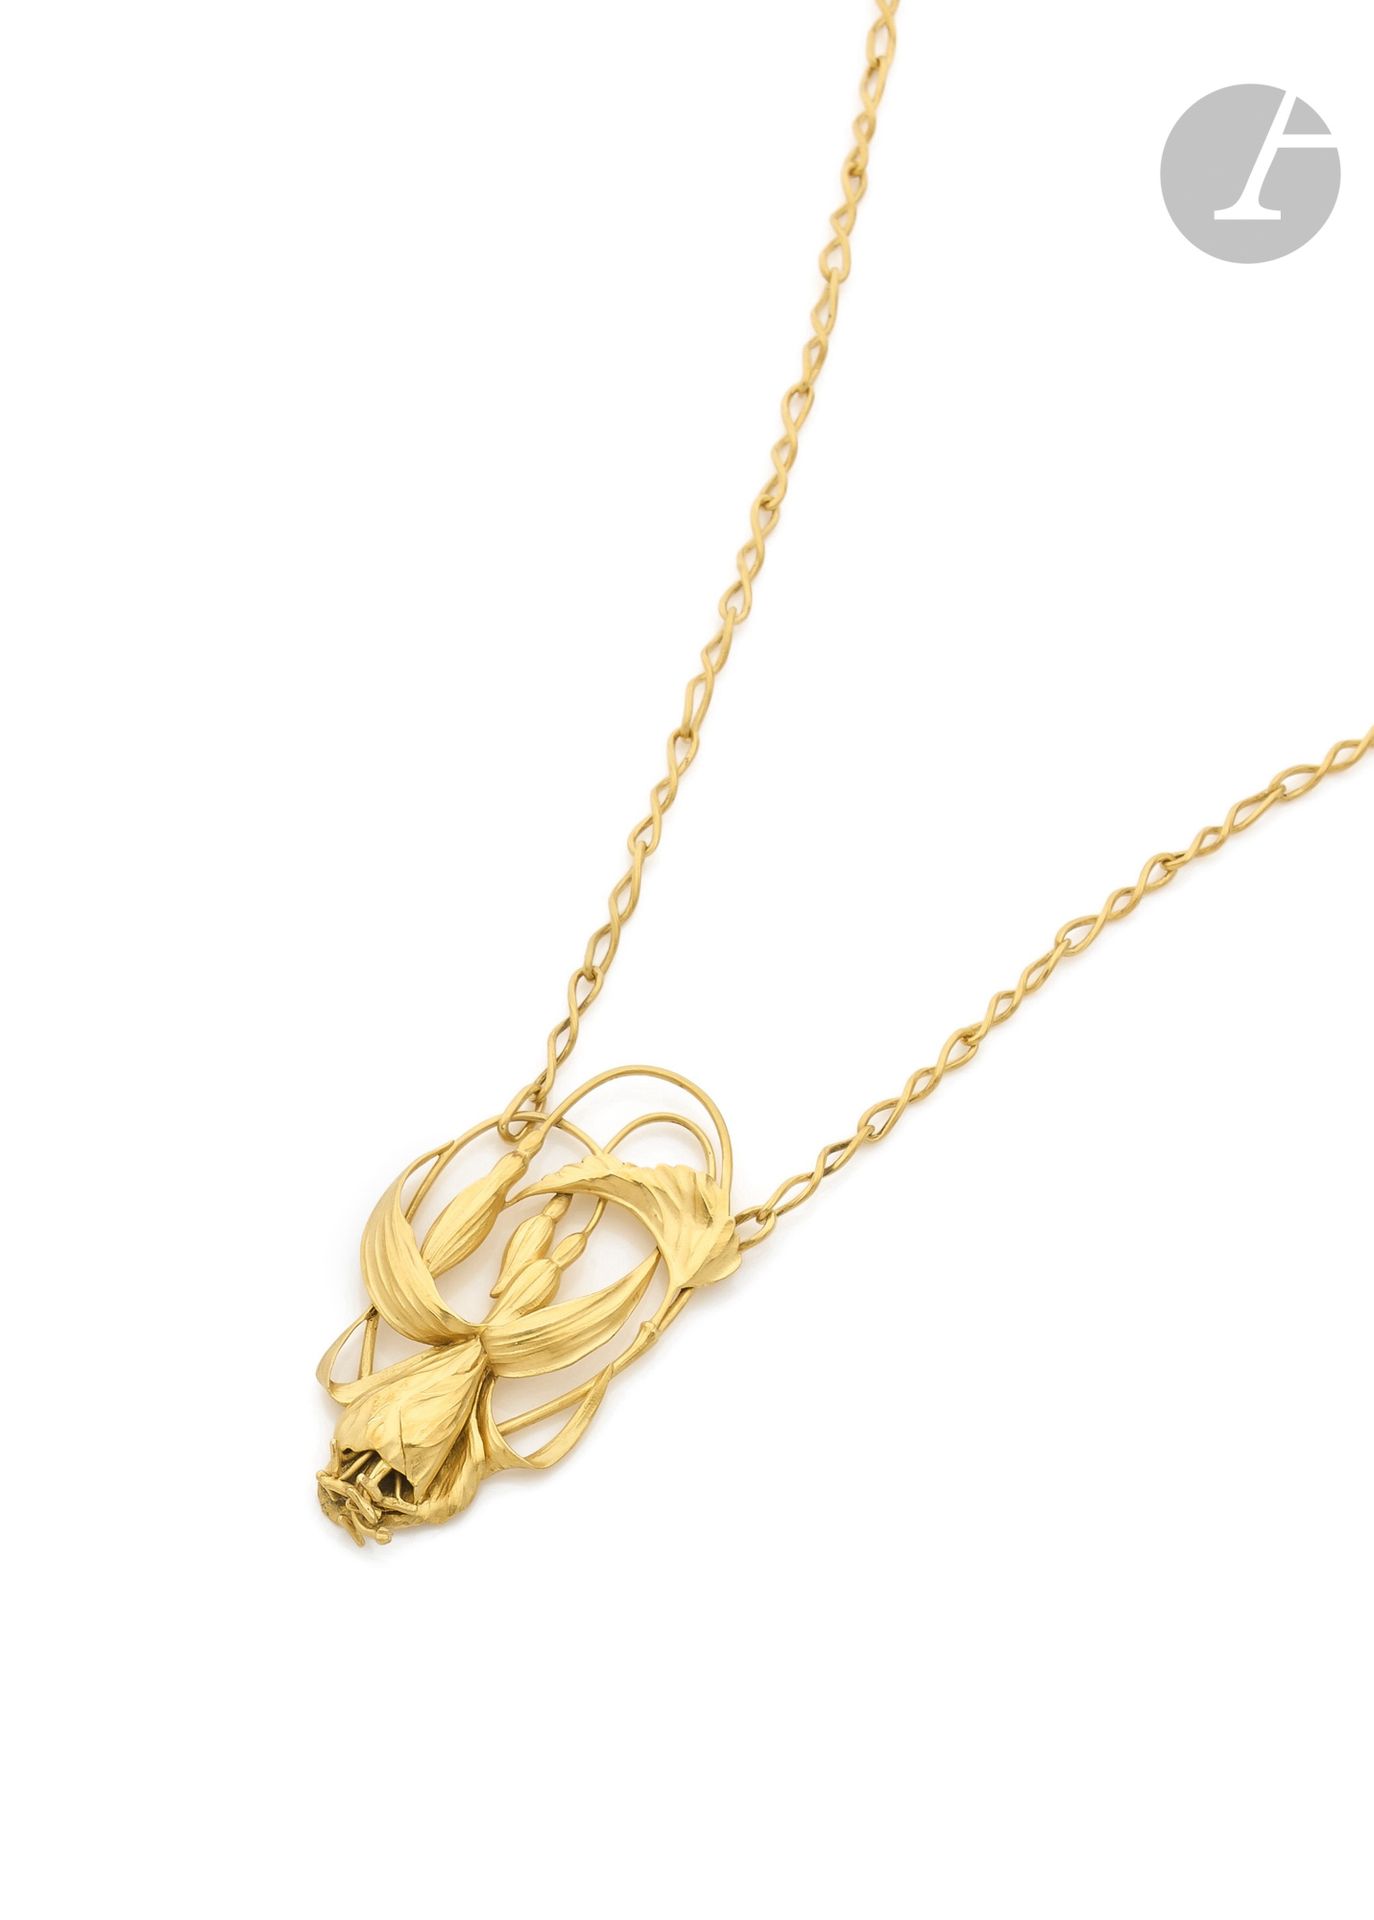 Null MIAULT
Necklace in 18K (750) gold twisted links, adorned with a chased flow&hellip;